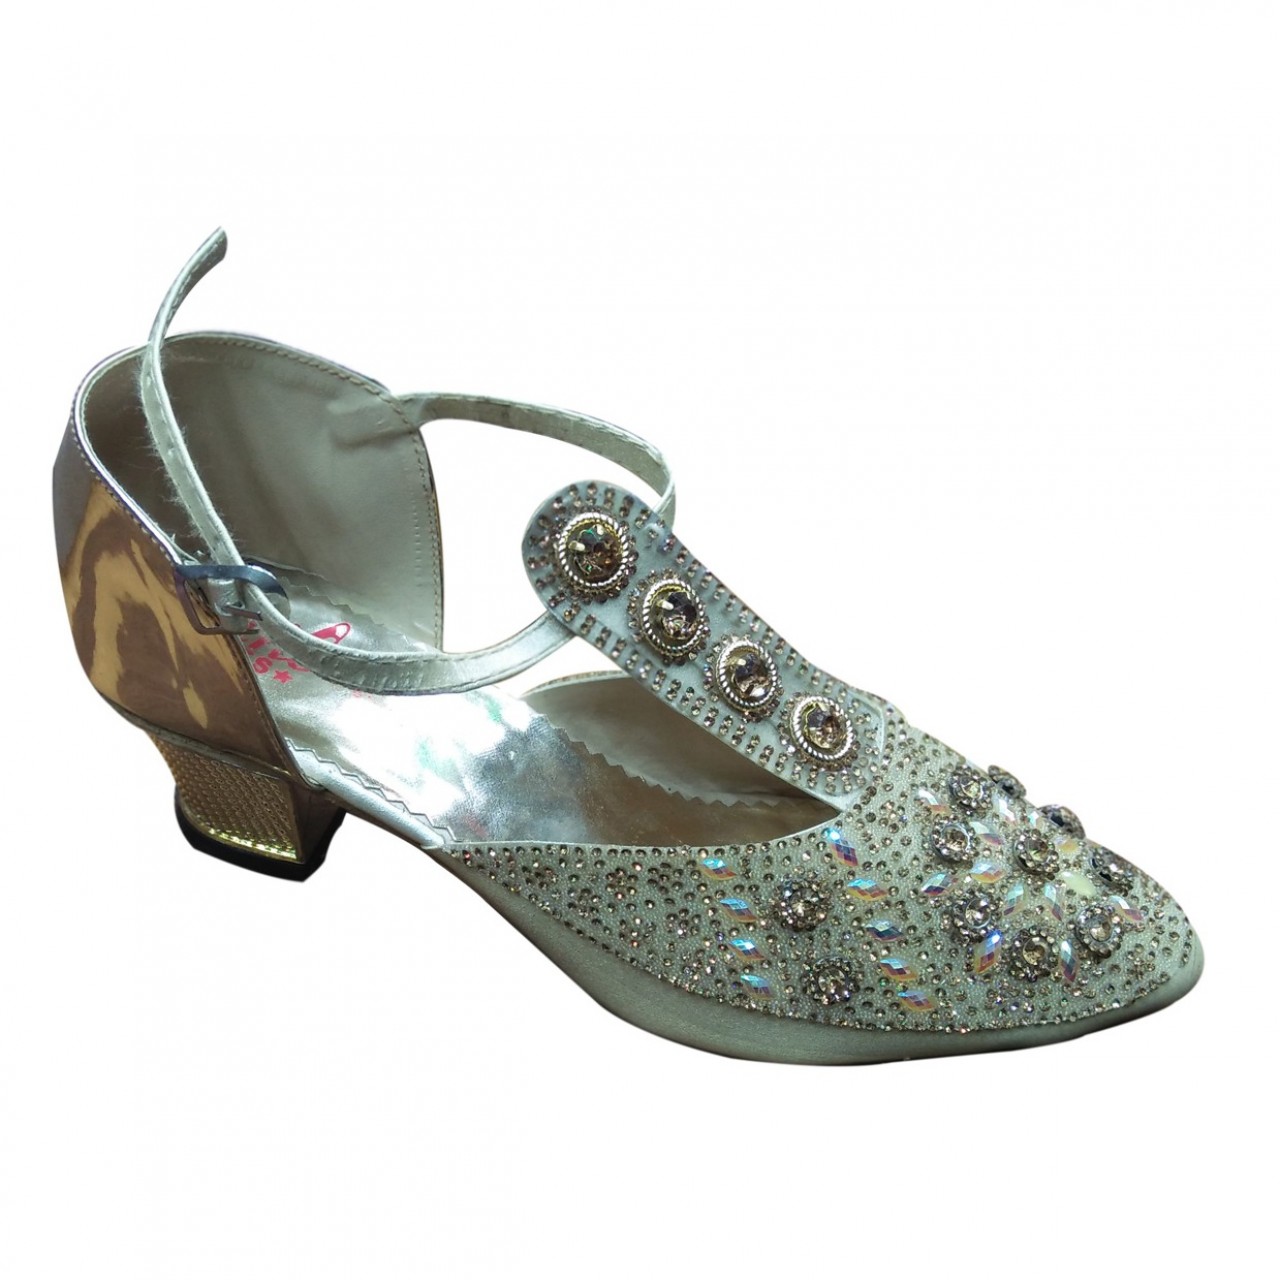 Fancy Partywear Shoes For Women With Pearls & Beads - Silver - 6 To 8